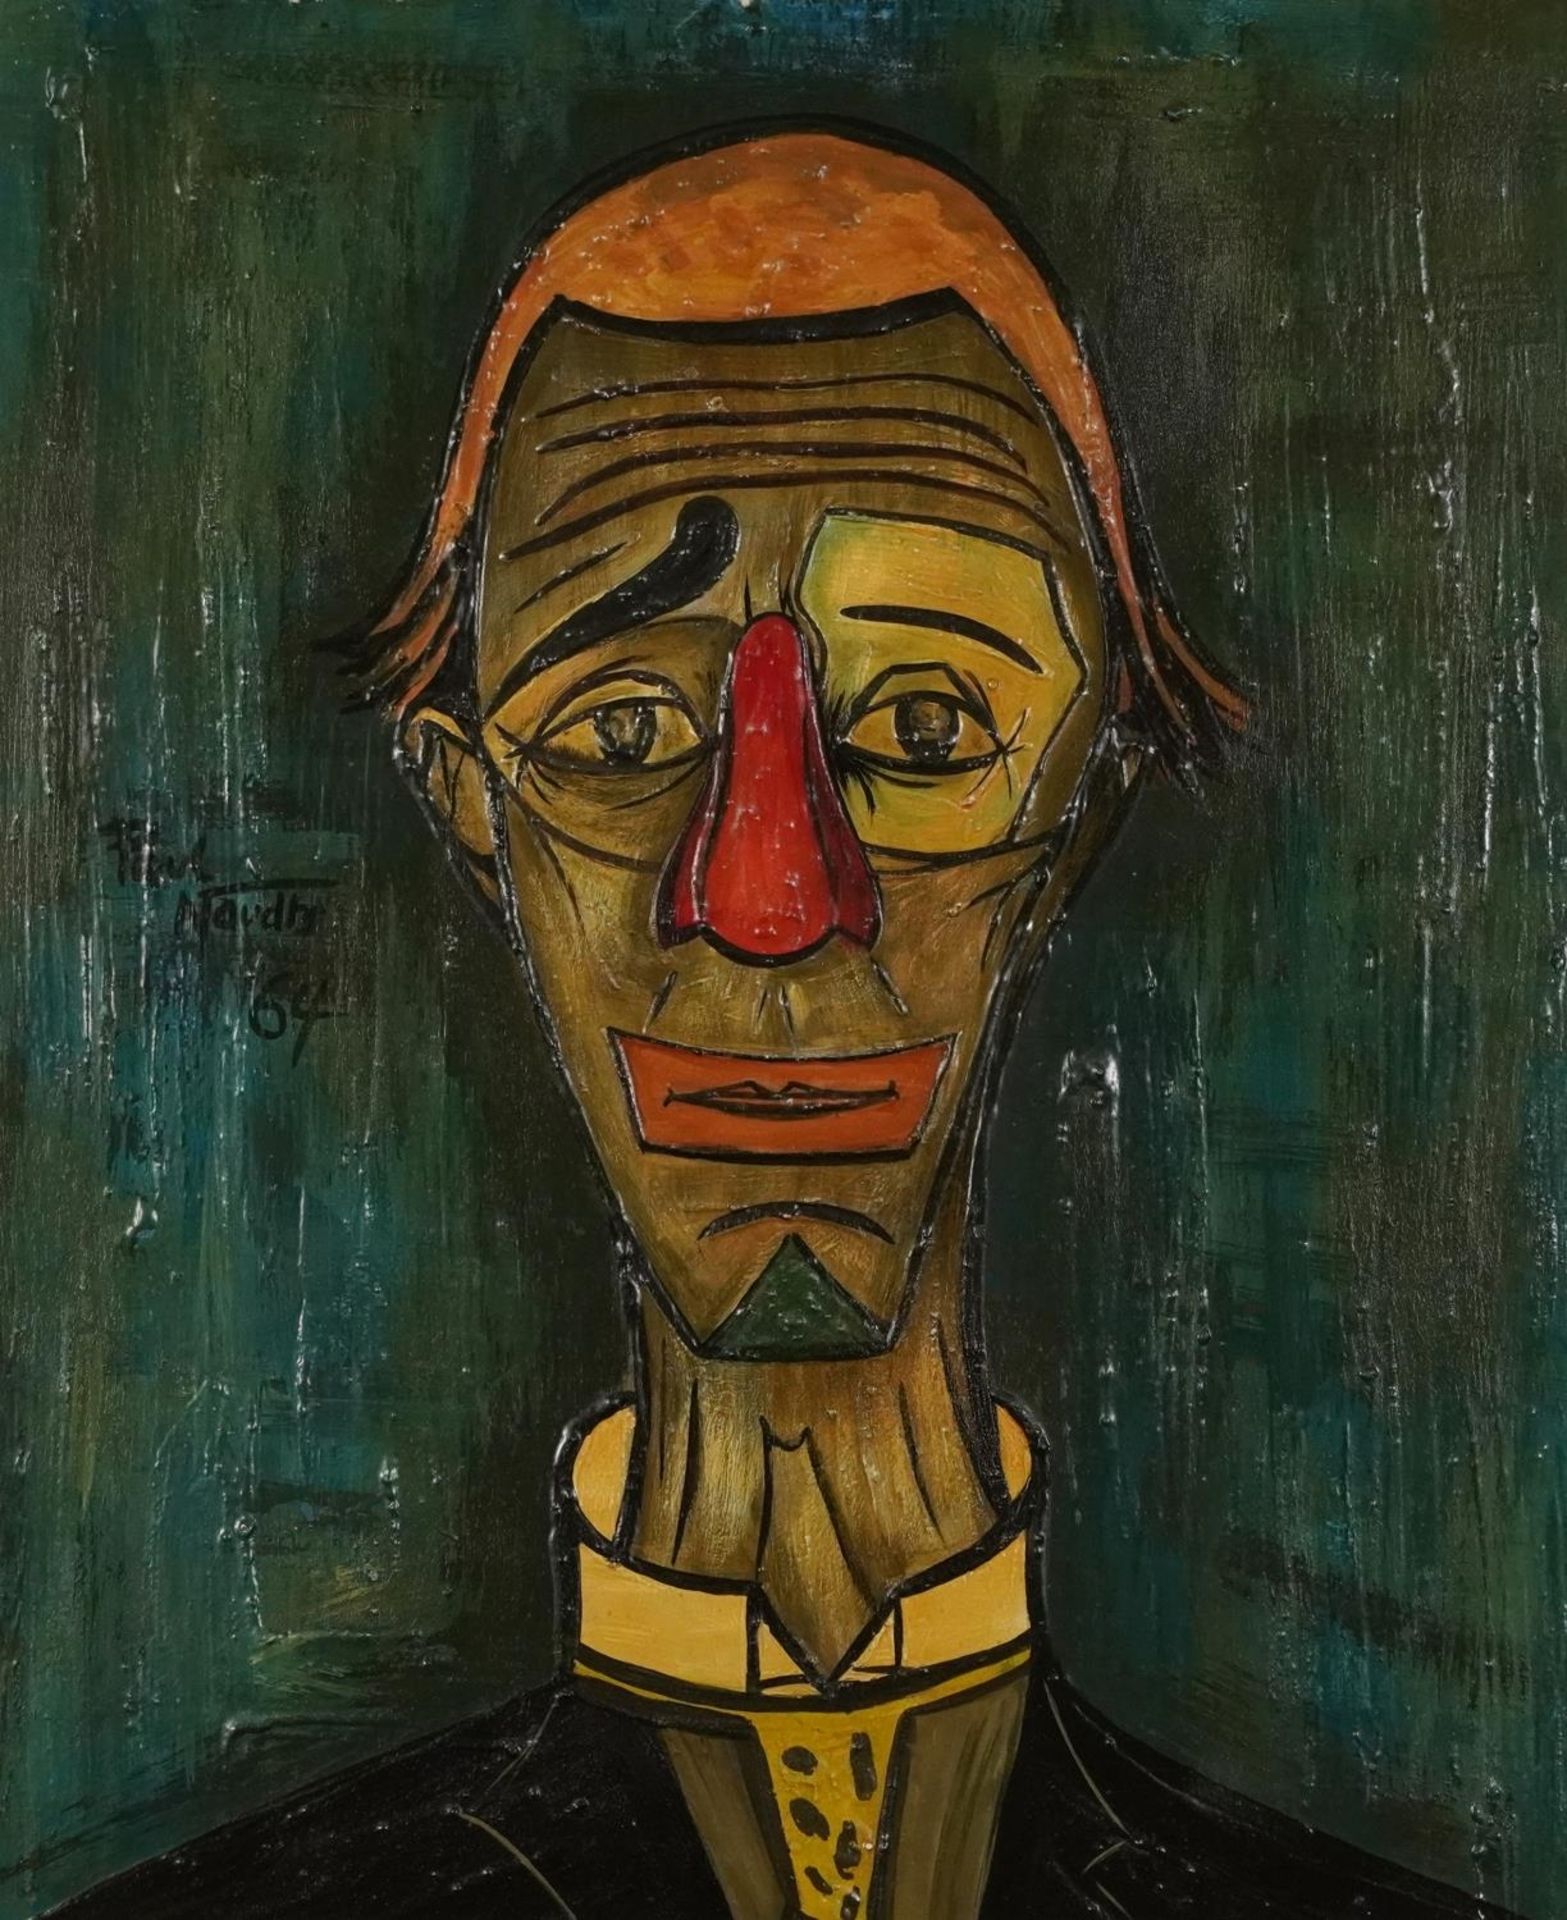 Manner of Bernard Buffet - Head and shoulders portrait of a clown, 1960s oil on board, mounted and